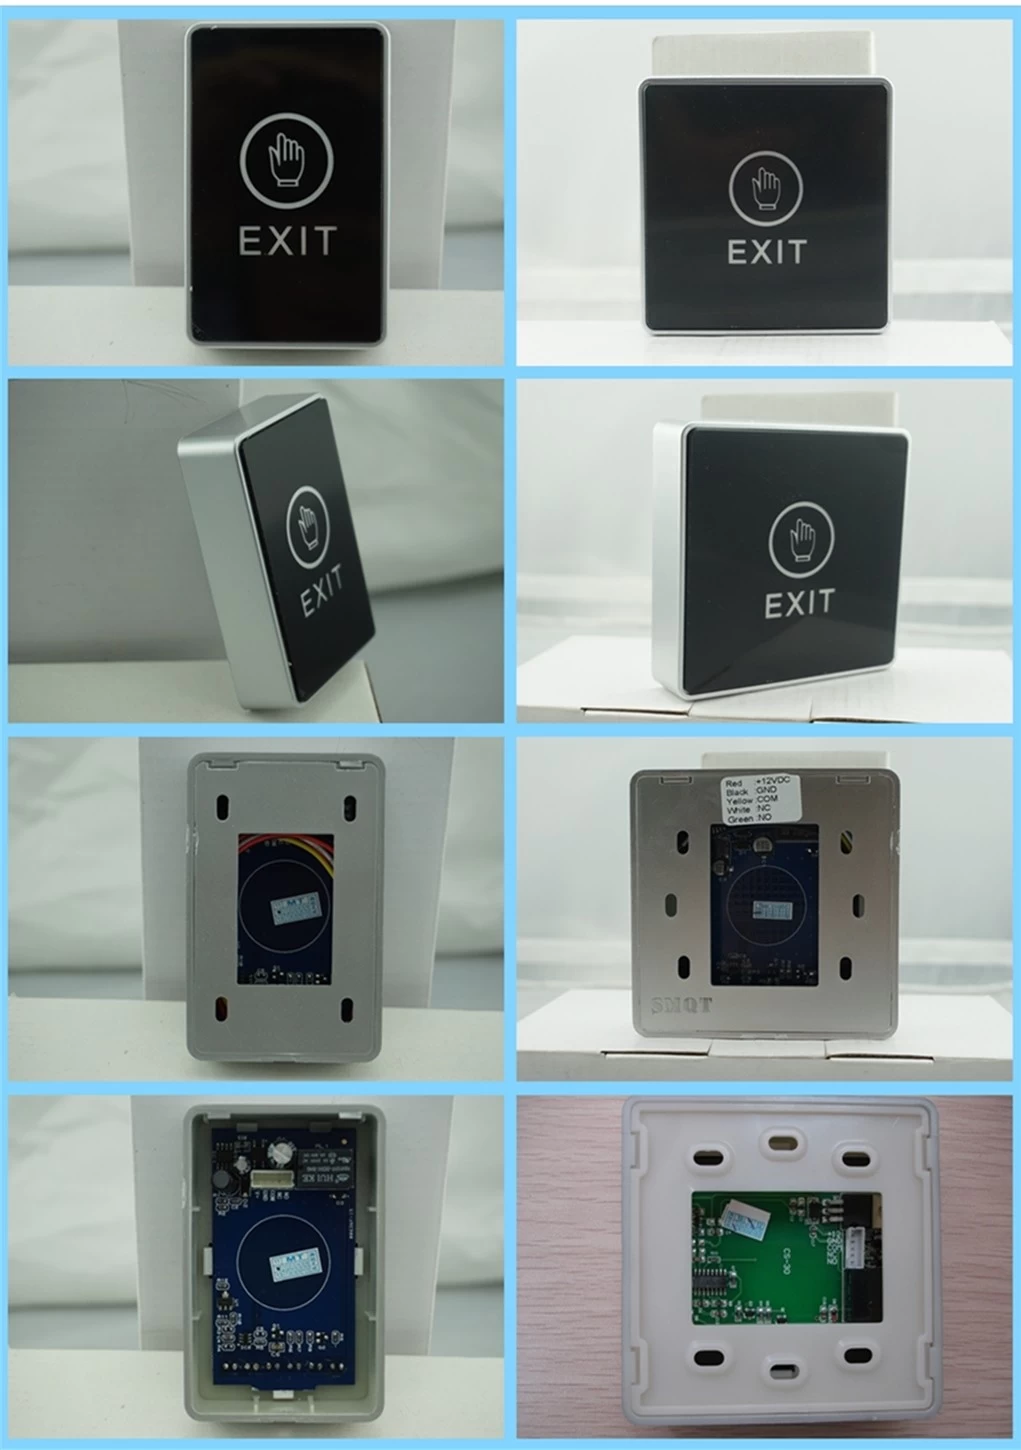 LED back light door switch button